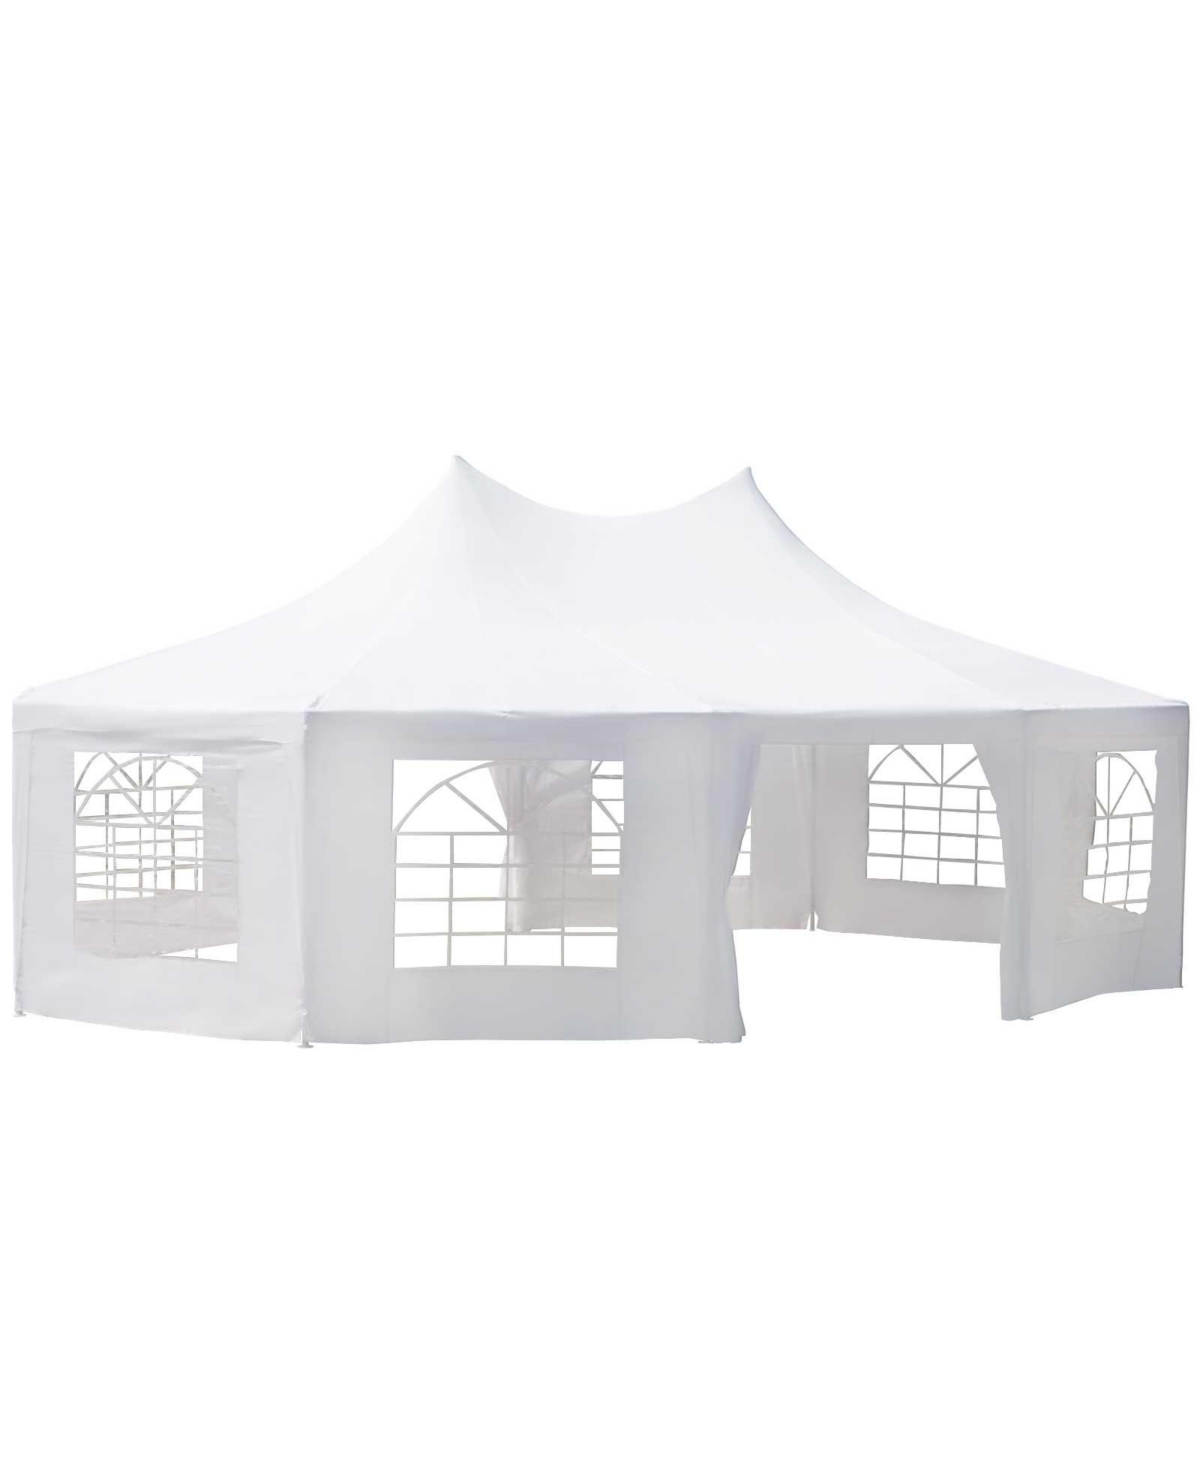 29.2 x21.3 Large 10-Wall Event Wedding Gazebo Canopy Tent with Open Floor Design & Weather Protection, White - White